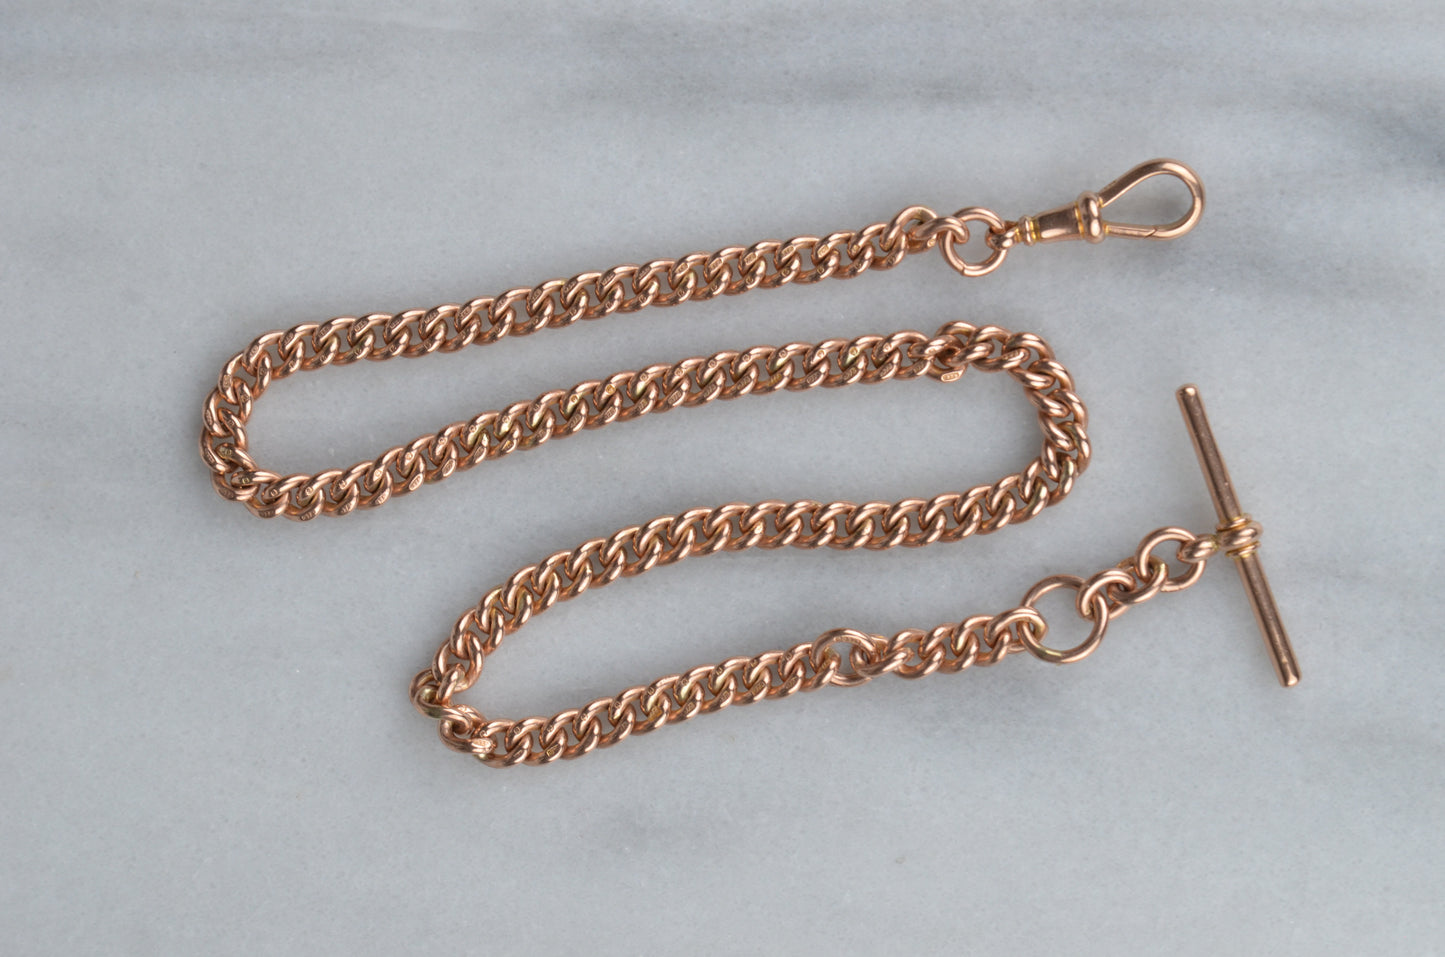 Incredible Heavy Antique Watch Chain